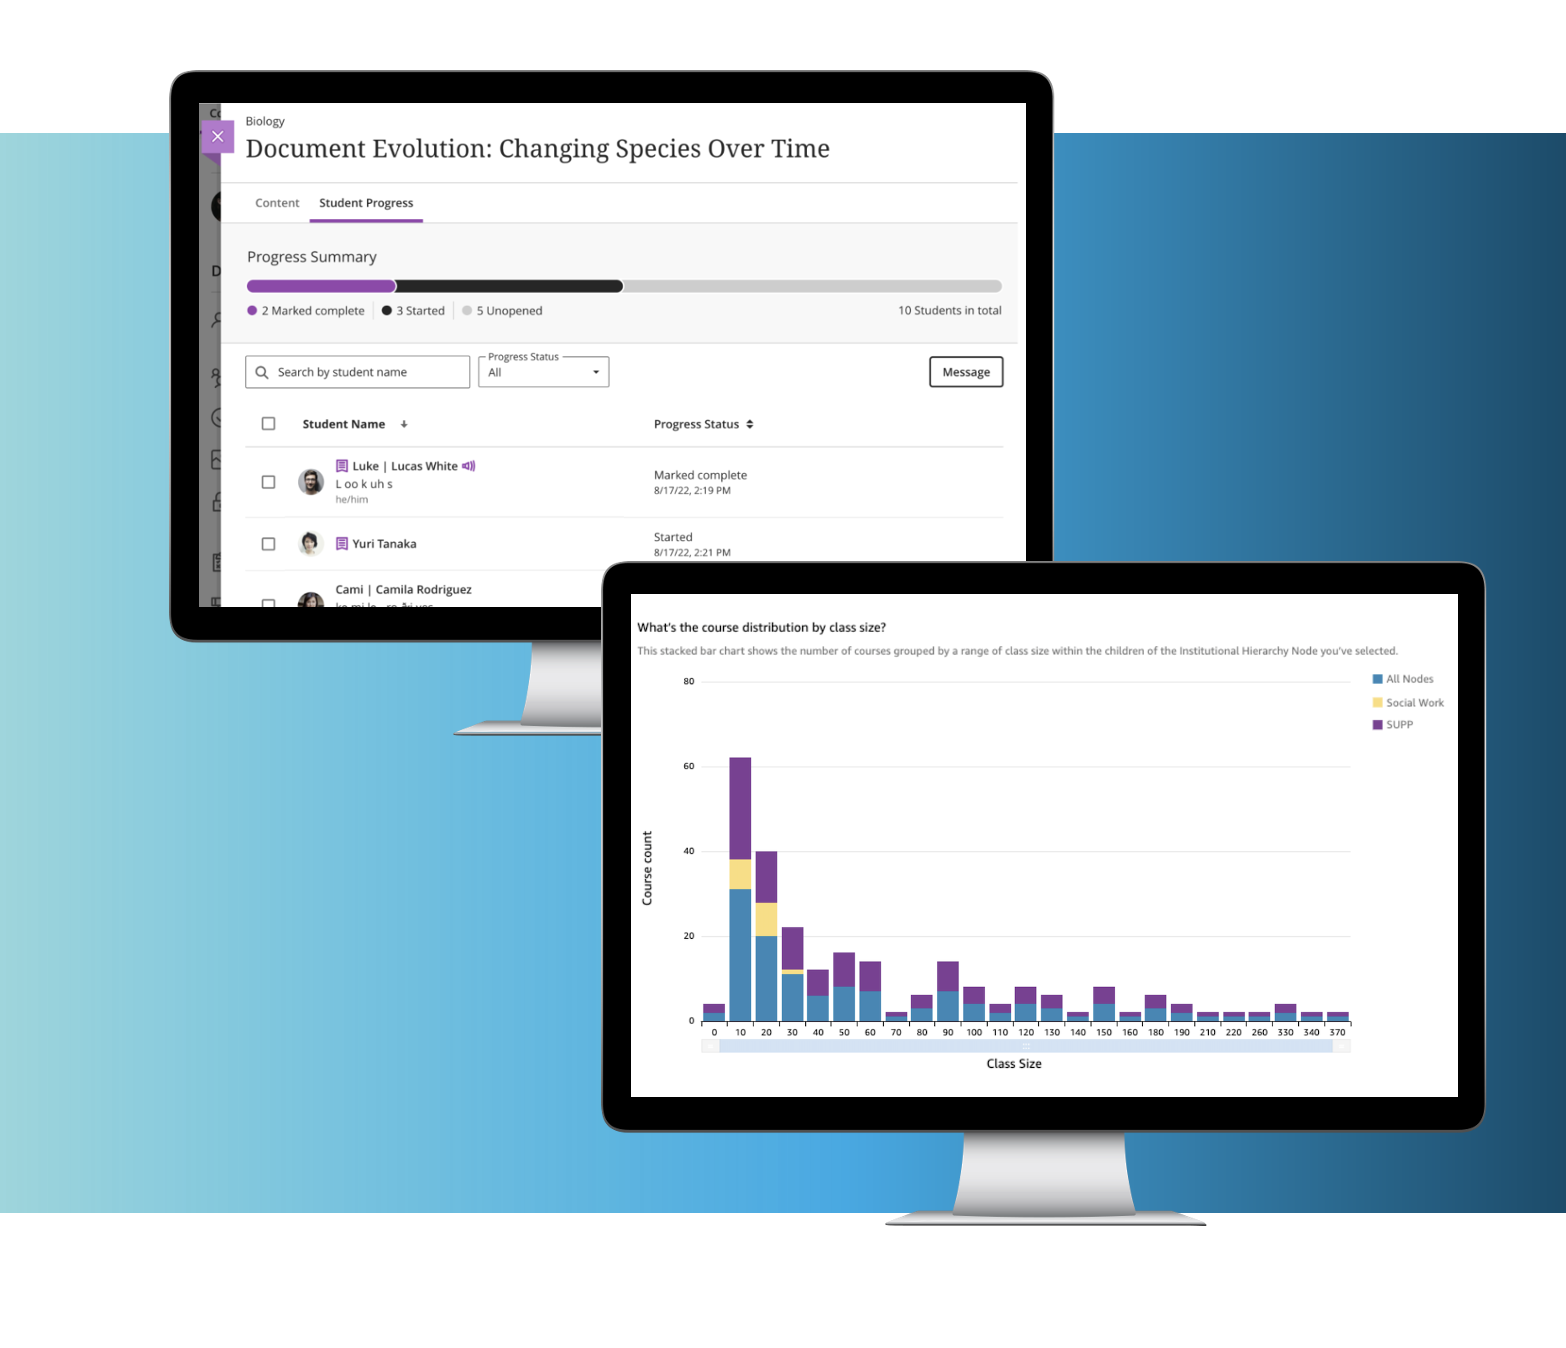 With insights embedded right into instructor and student workflows, Blackboard Learn's progress tracking tools help students and instructors know how they're tracking to achieve their goals - and where there is opportunity for improvement.